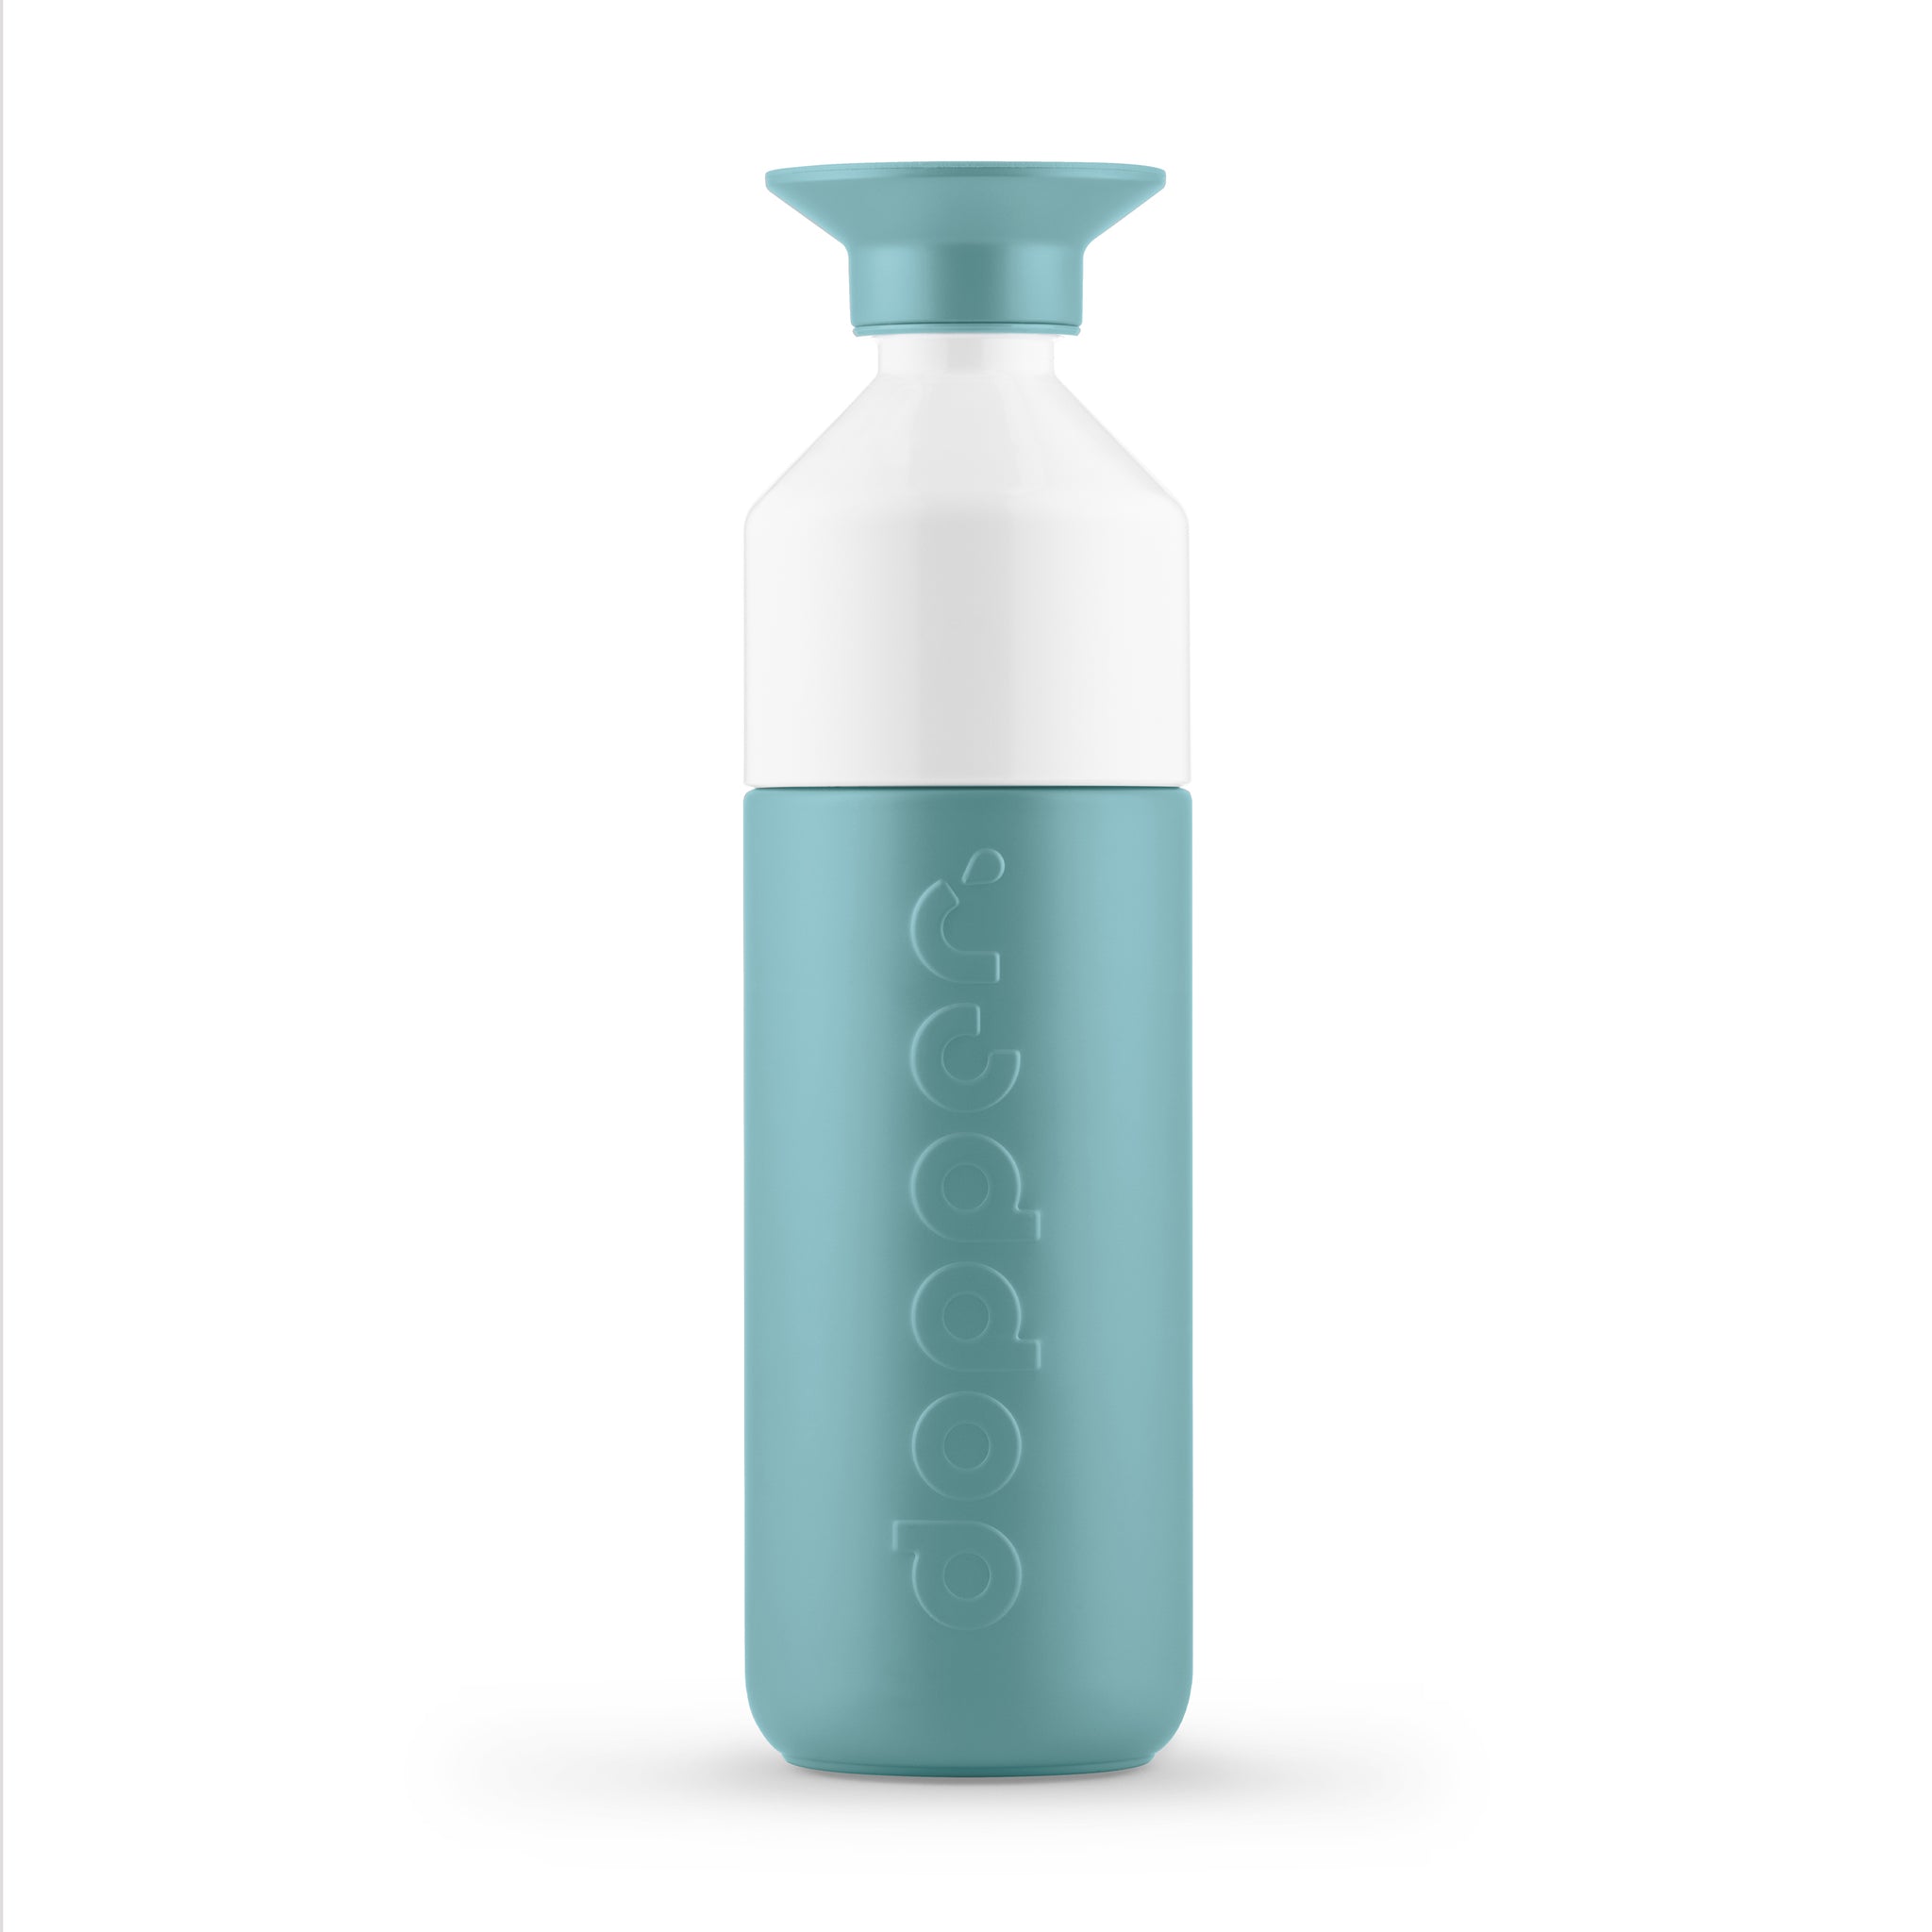 Dopper Insulated Large Bottlenose Blue│Thermosfles 580ml Blauw│art. 5289│voorkant met witte achtergrond